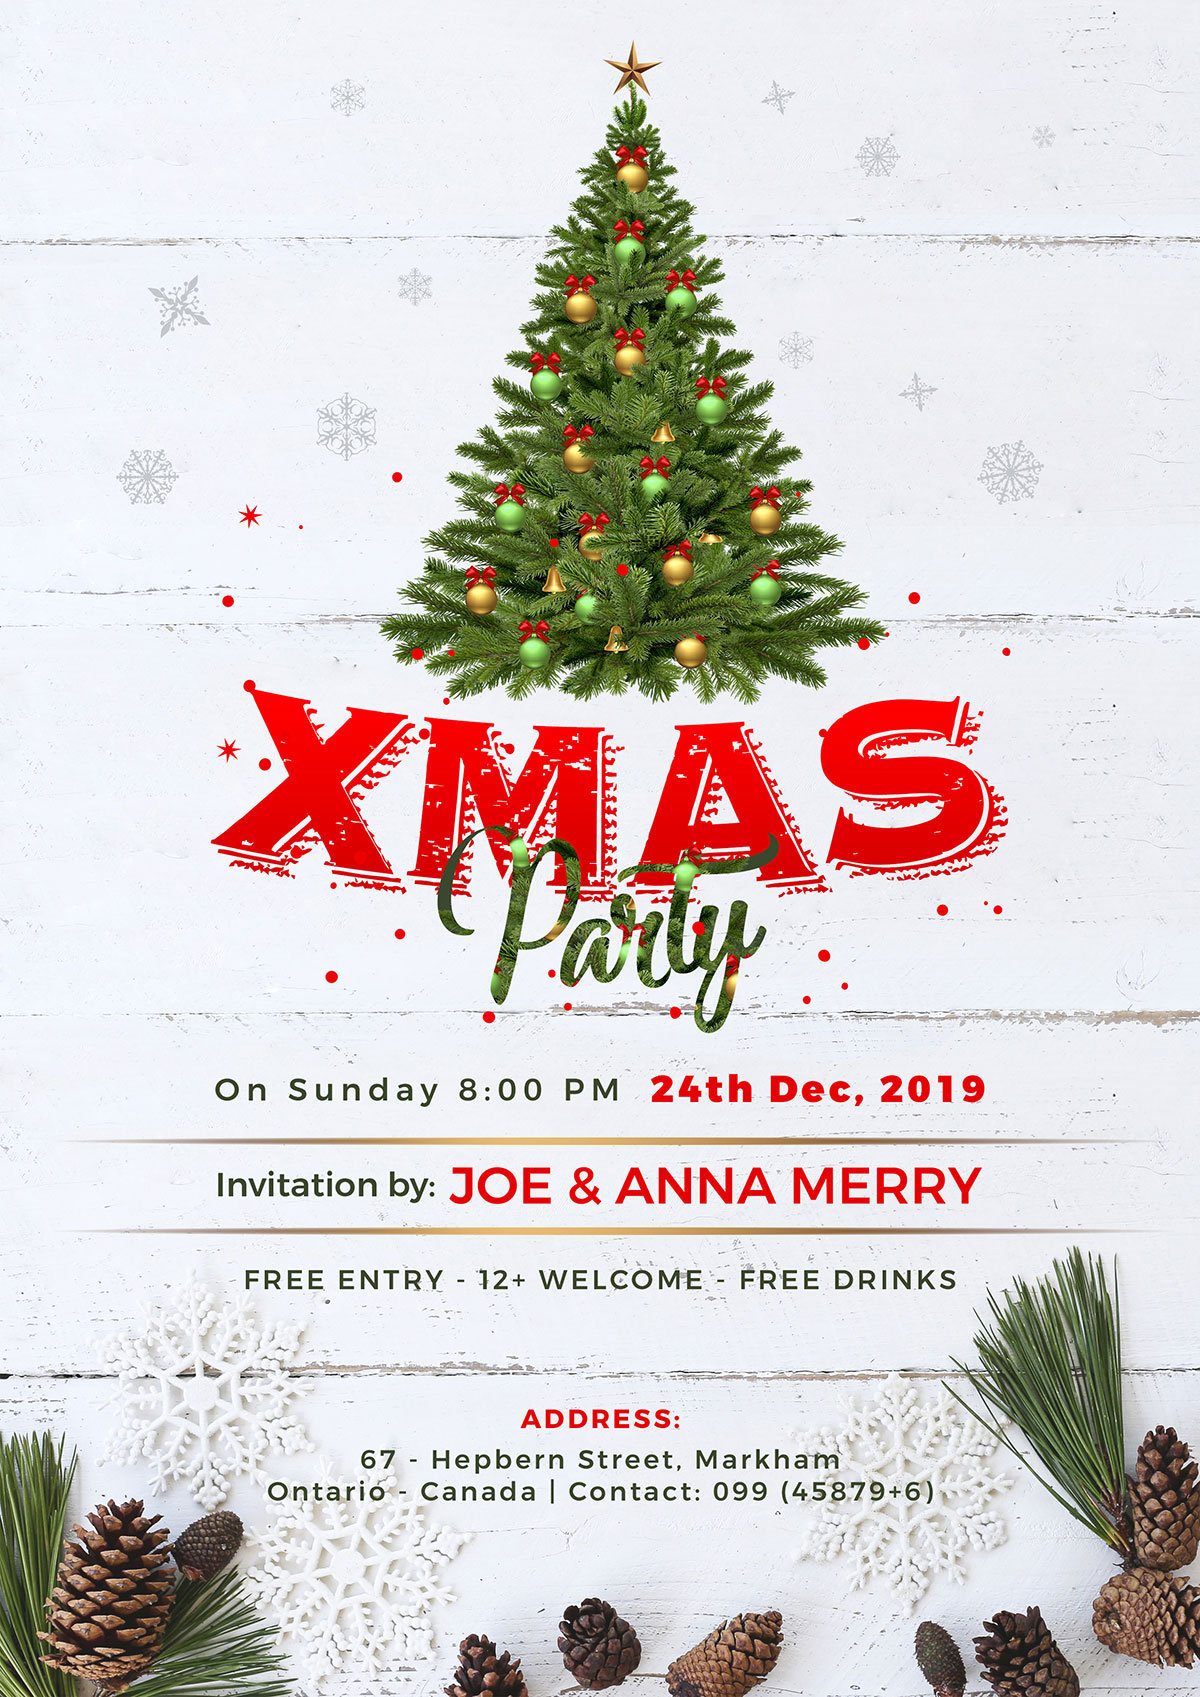 free-christmas-party-flyer-design-template-2019-in-psd-format-designbolts